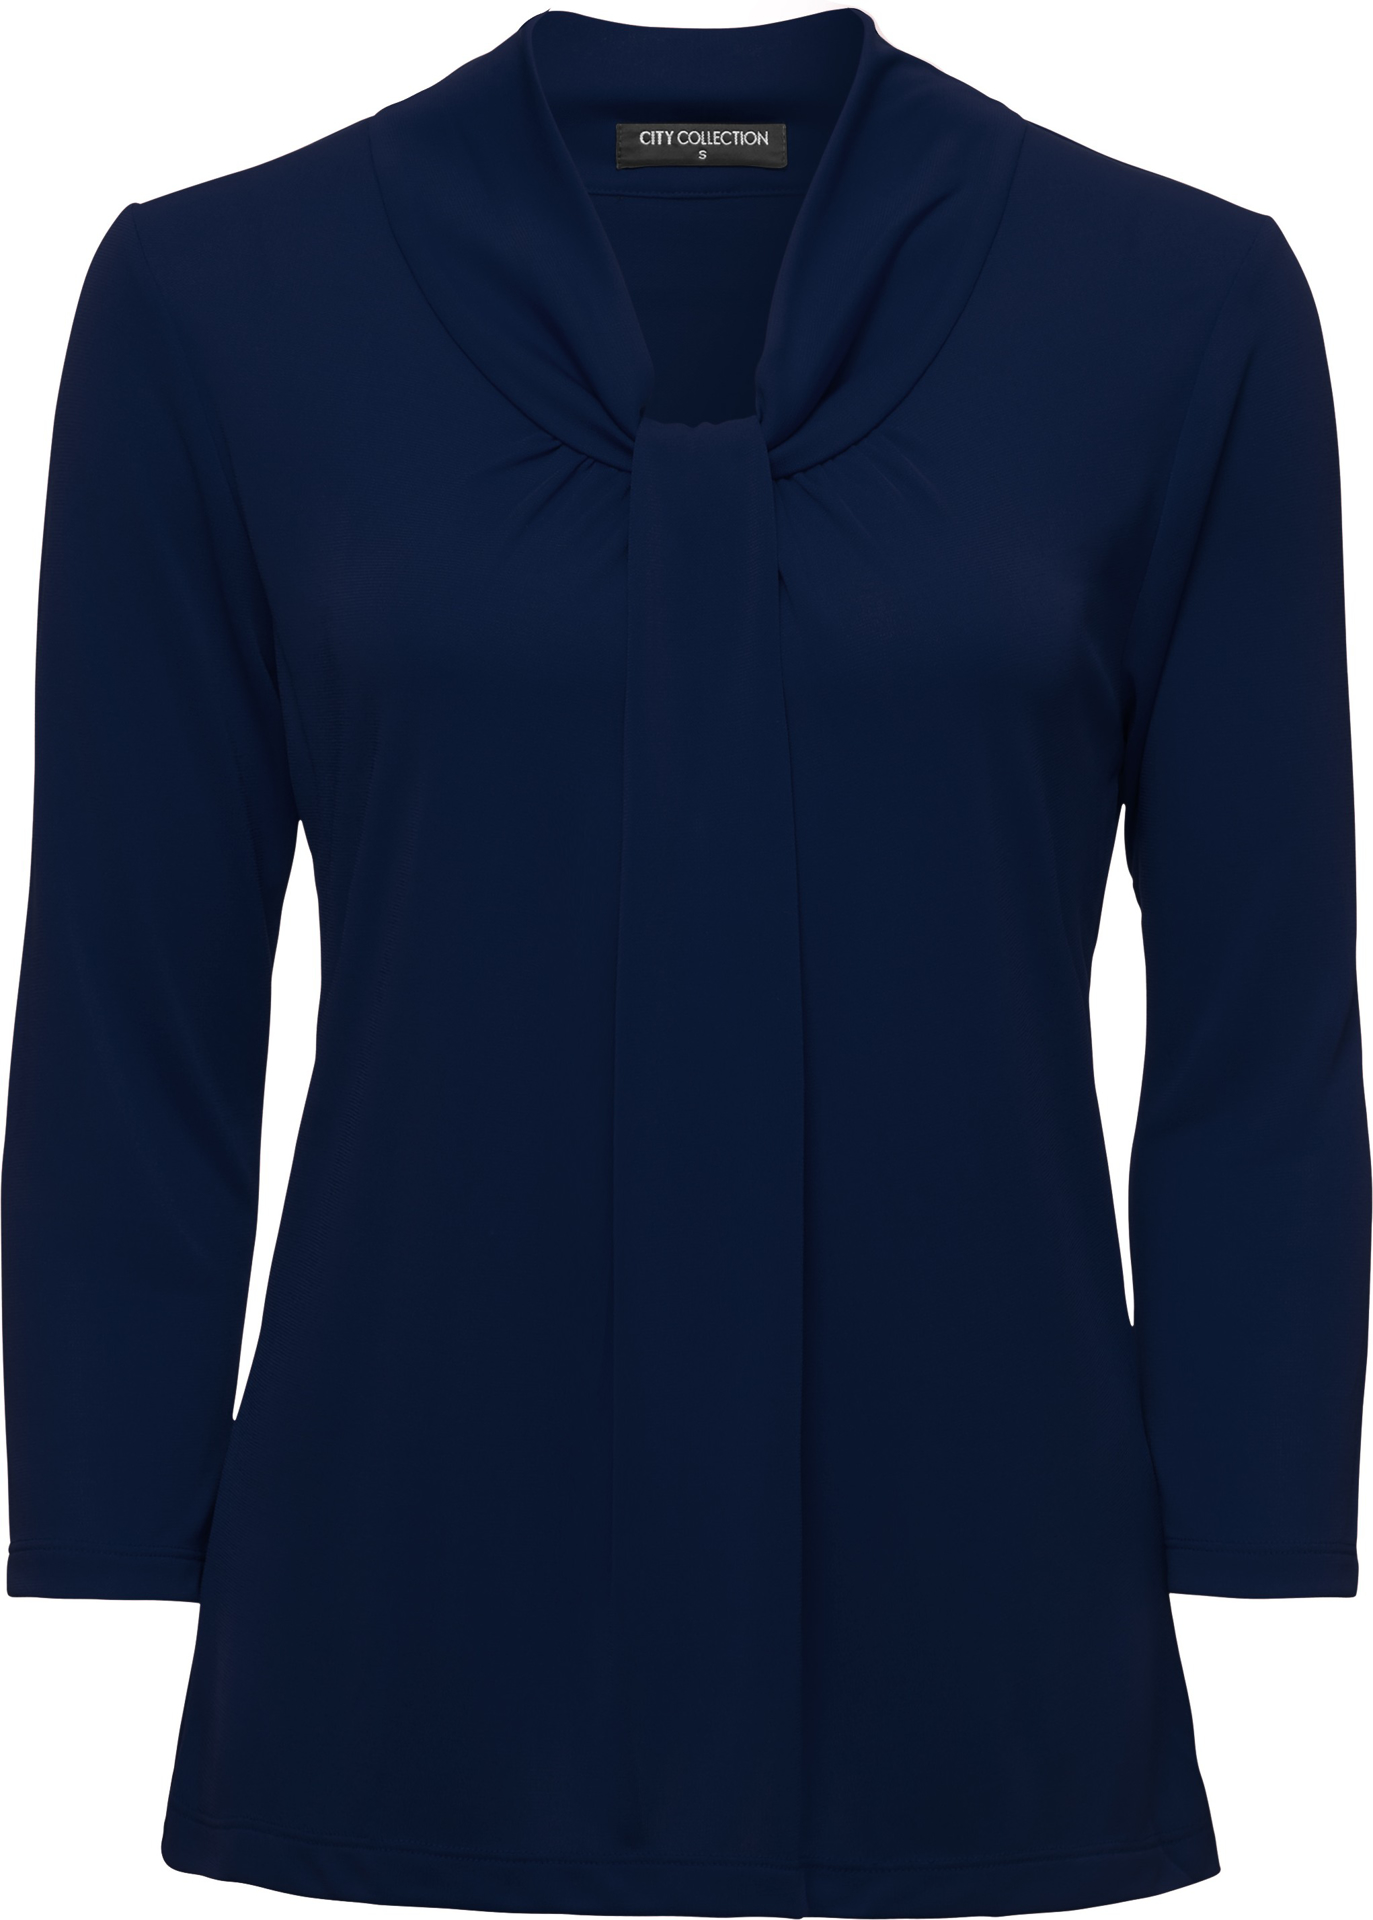 City Collection Pippa Knit 3/4 Sleeve Blouse (2221) | Scrubs, Corporate ...